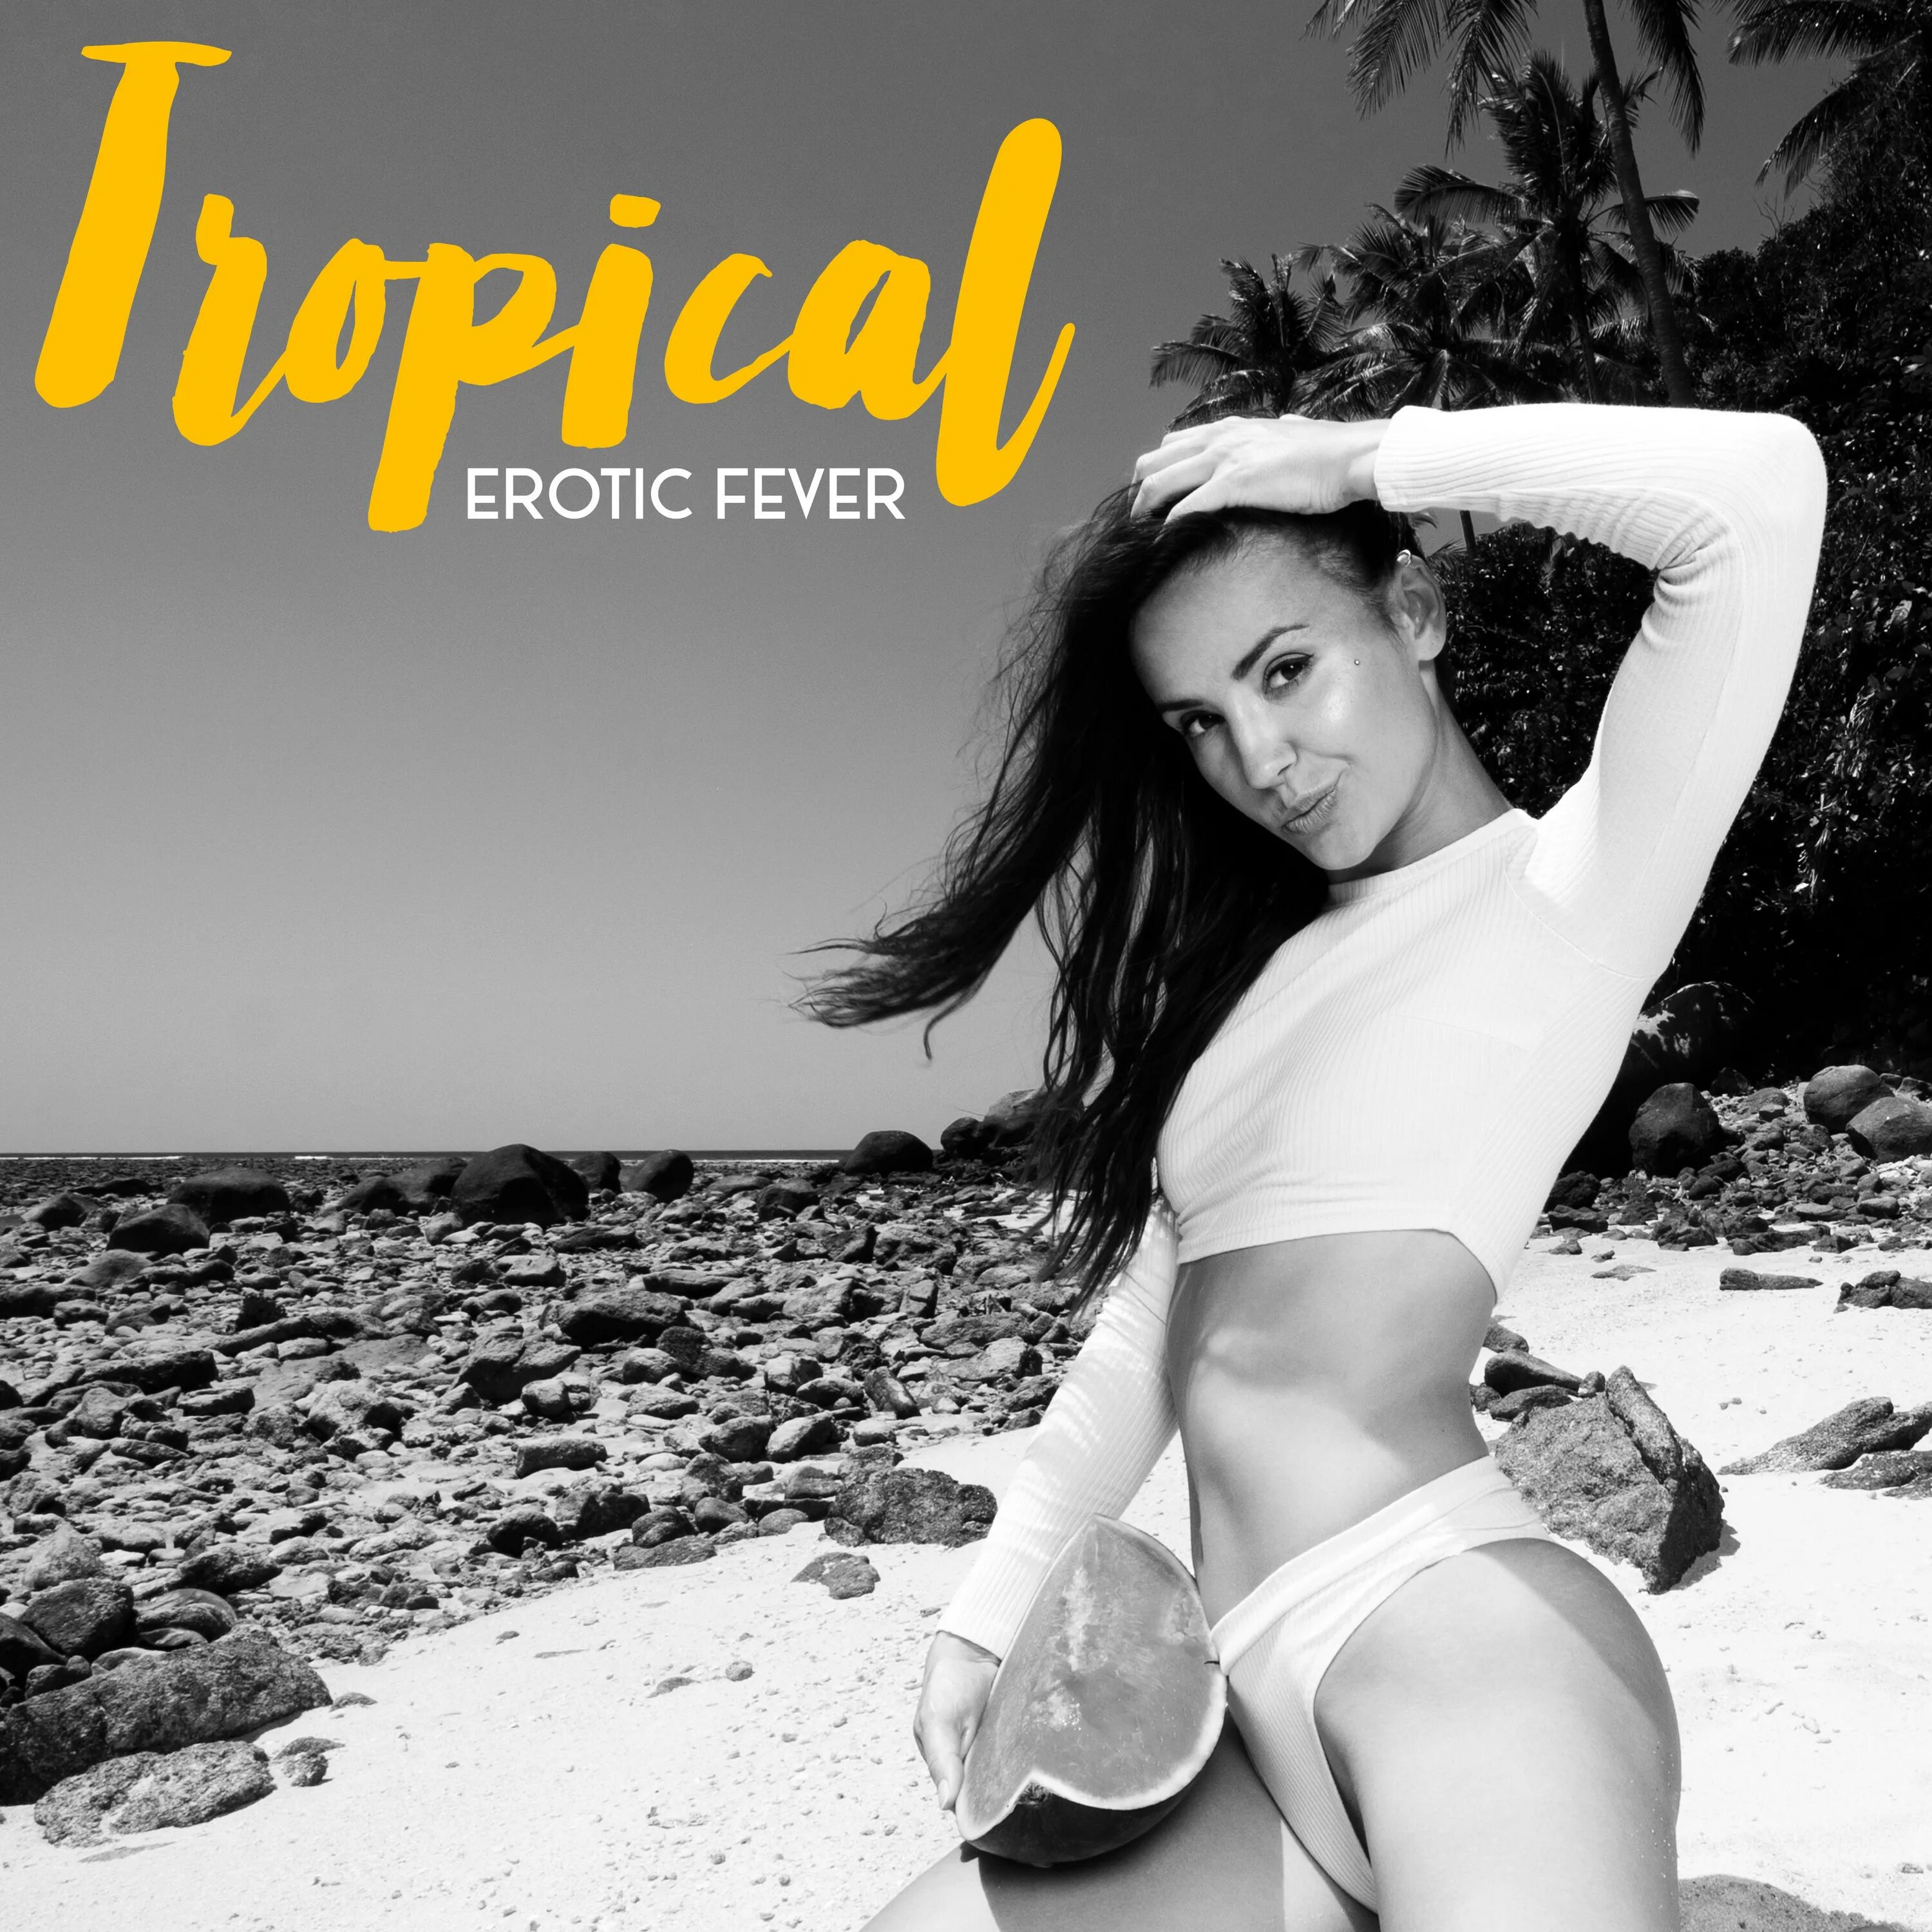 Tropical Chill Music Land - Deep House Kiss. Tropic Vibration обложка альбома. Tropical Chill Style. Tropic mood.